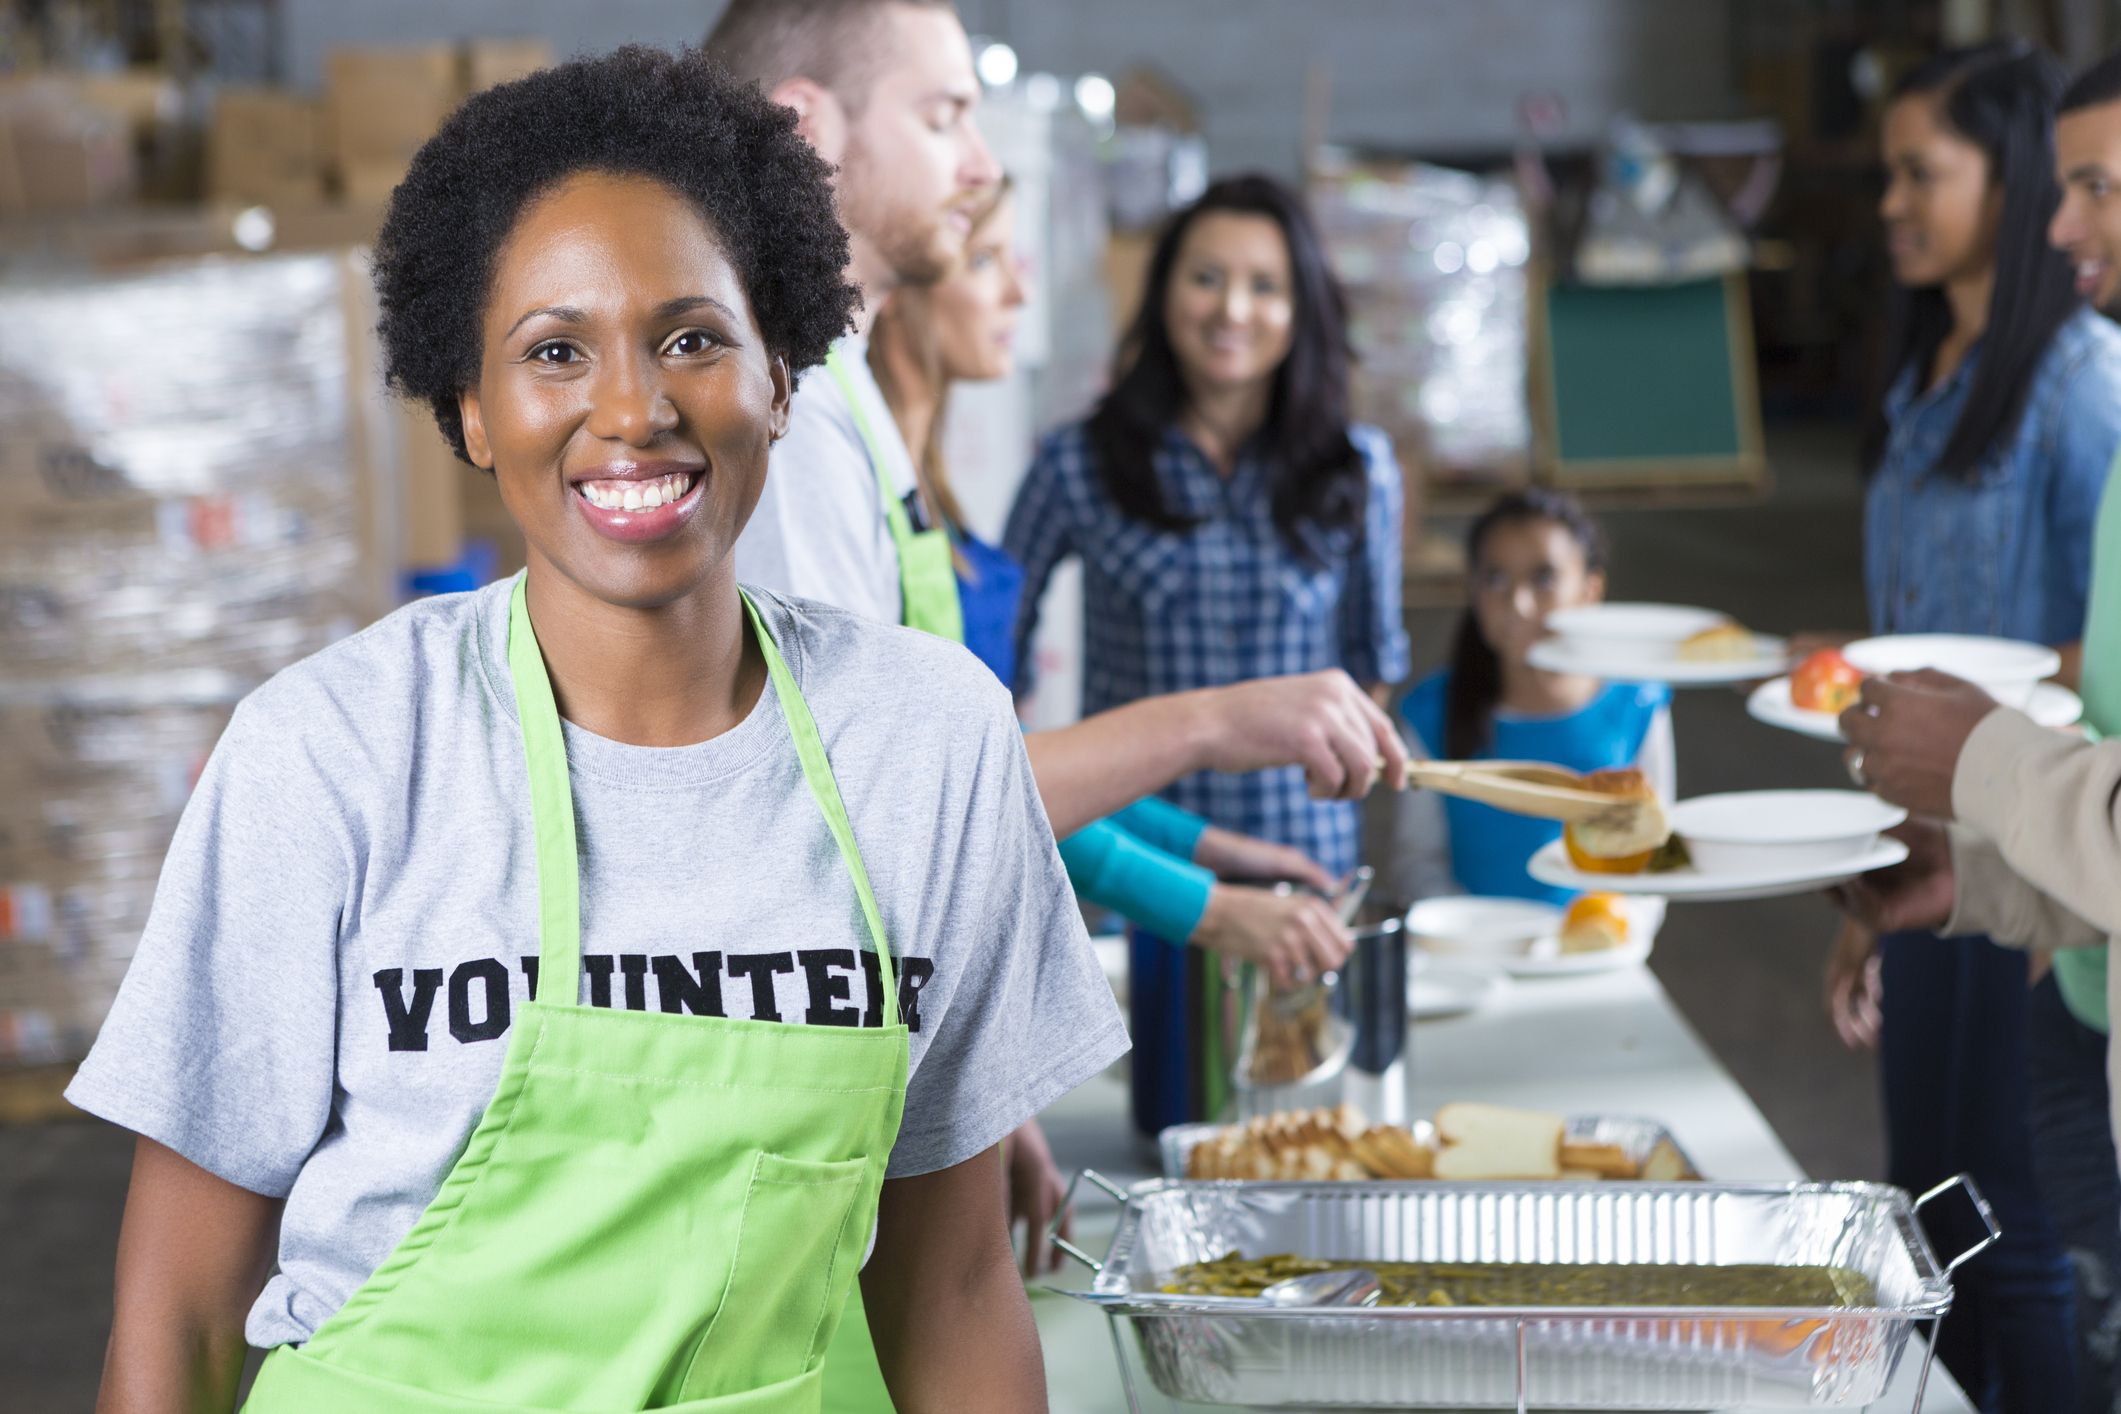 Volunteer at a soup kitchen; Getty Images